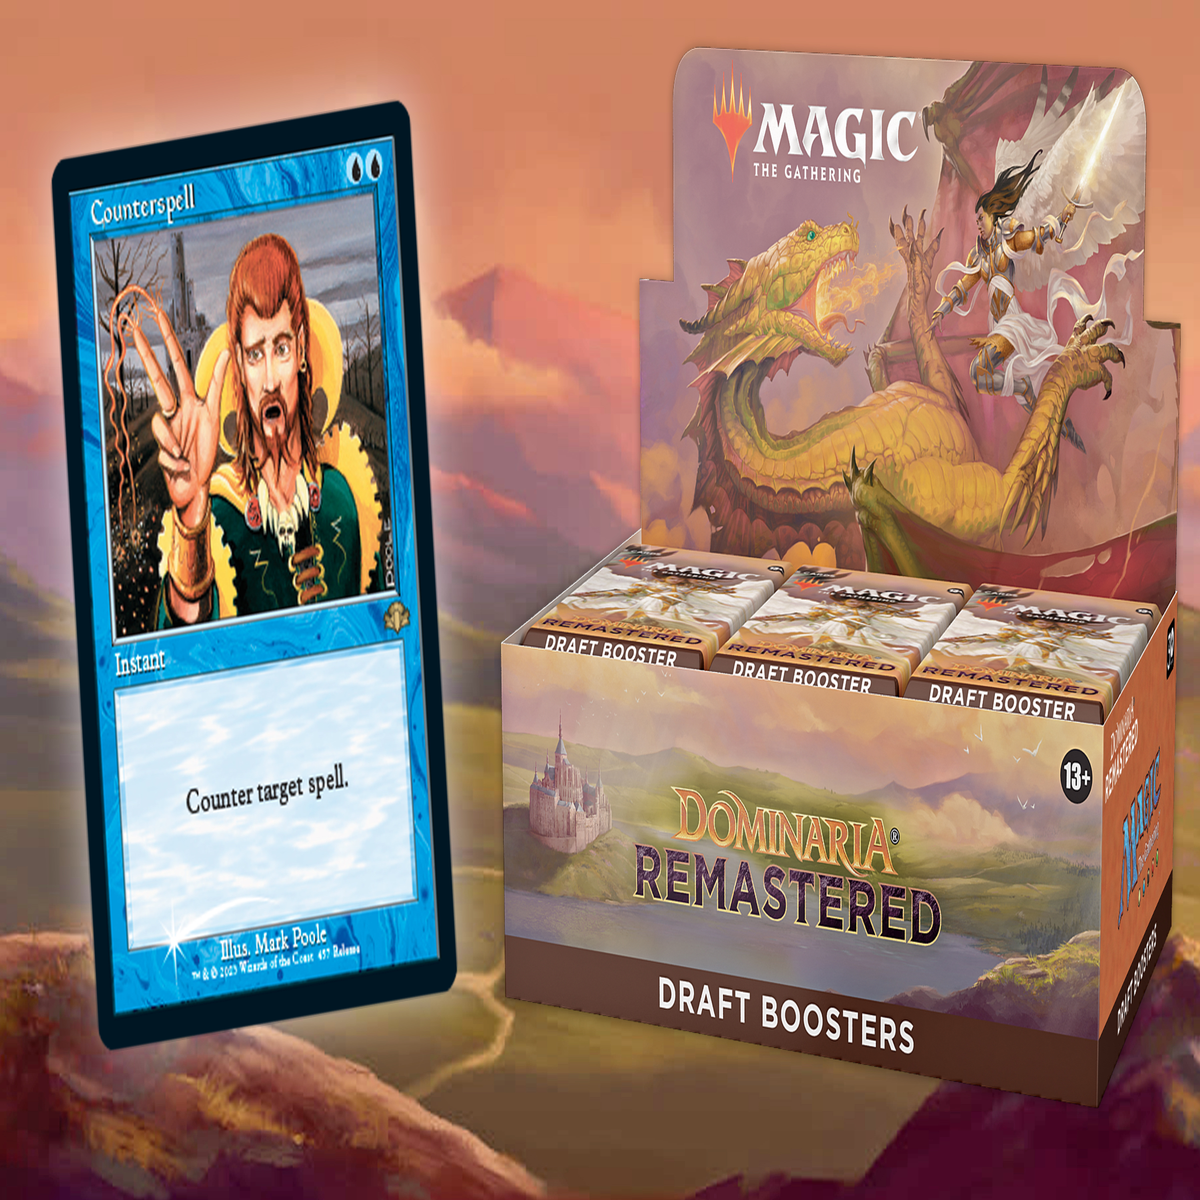 Worlds Smallest Magic: The Gathering Exclusive Collector Set Featuring  Ajani VS. Nicol Bolas and Heroes VS. Monsters Duel Decks and Exclusive  Playing